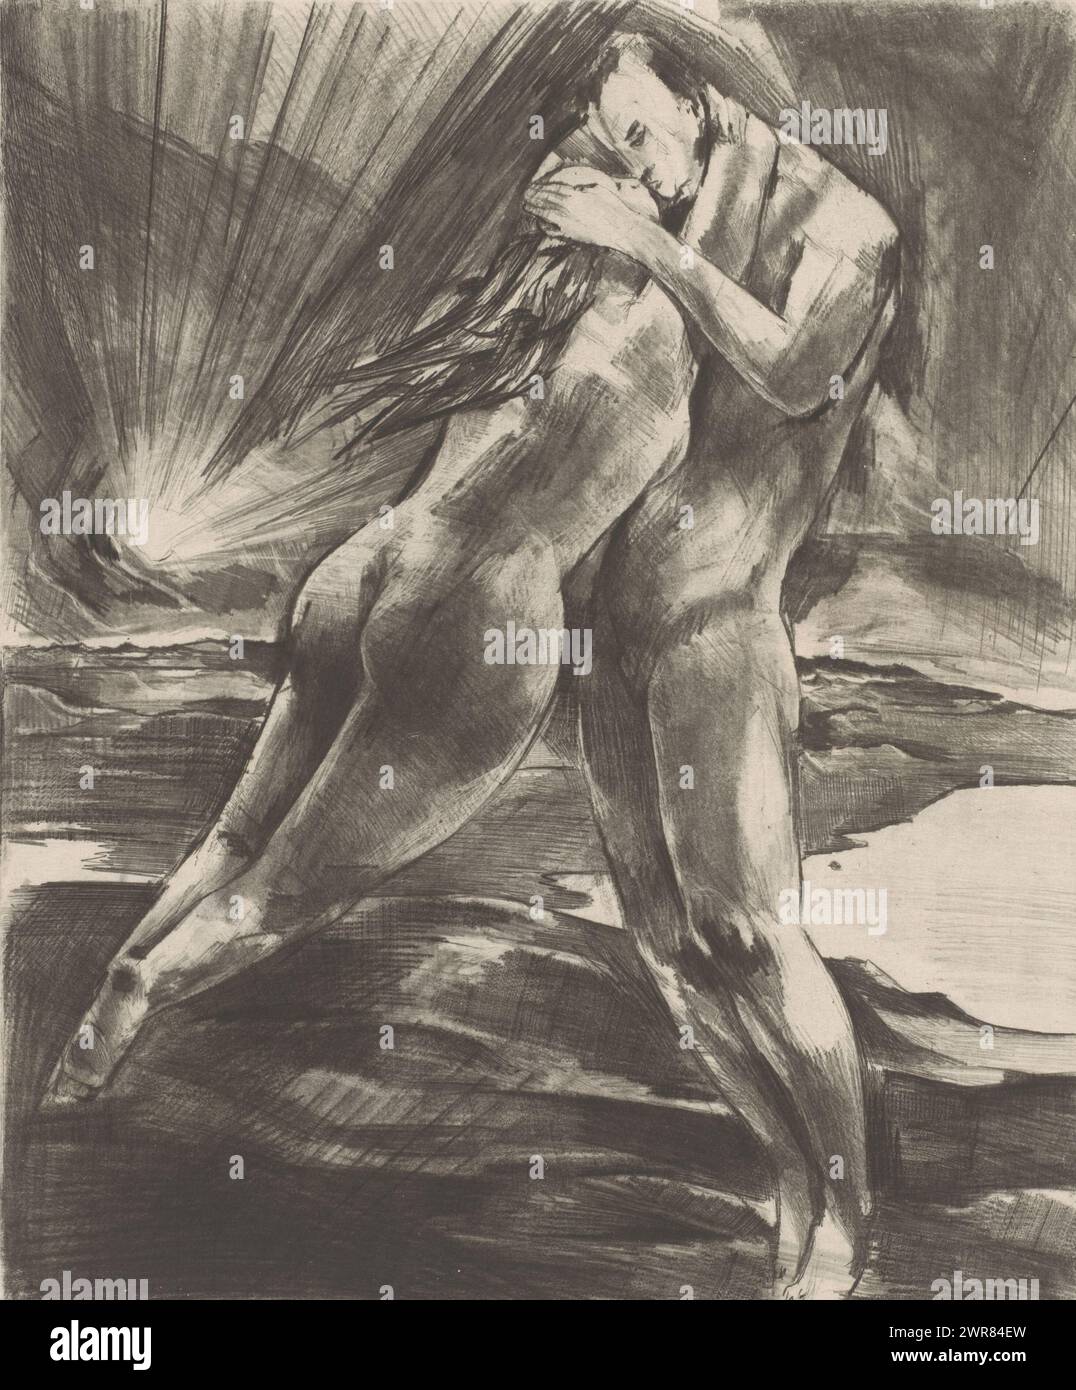 Bare landscape with a naked man and woman in embrace, print maker: Willy Jaeckel, (signed by artist), 1898 - 1944, paper, height 296 mm × width 246 mm, print Stock Photo